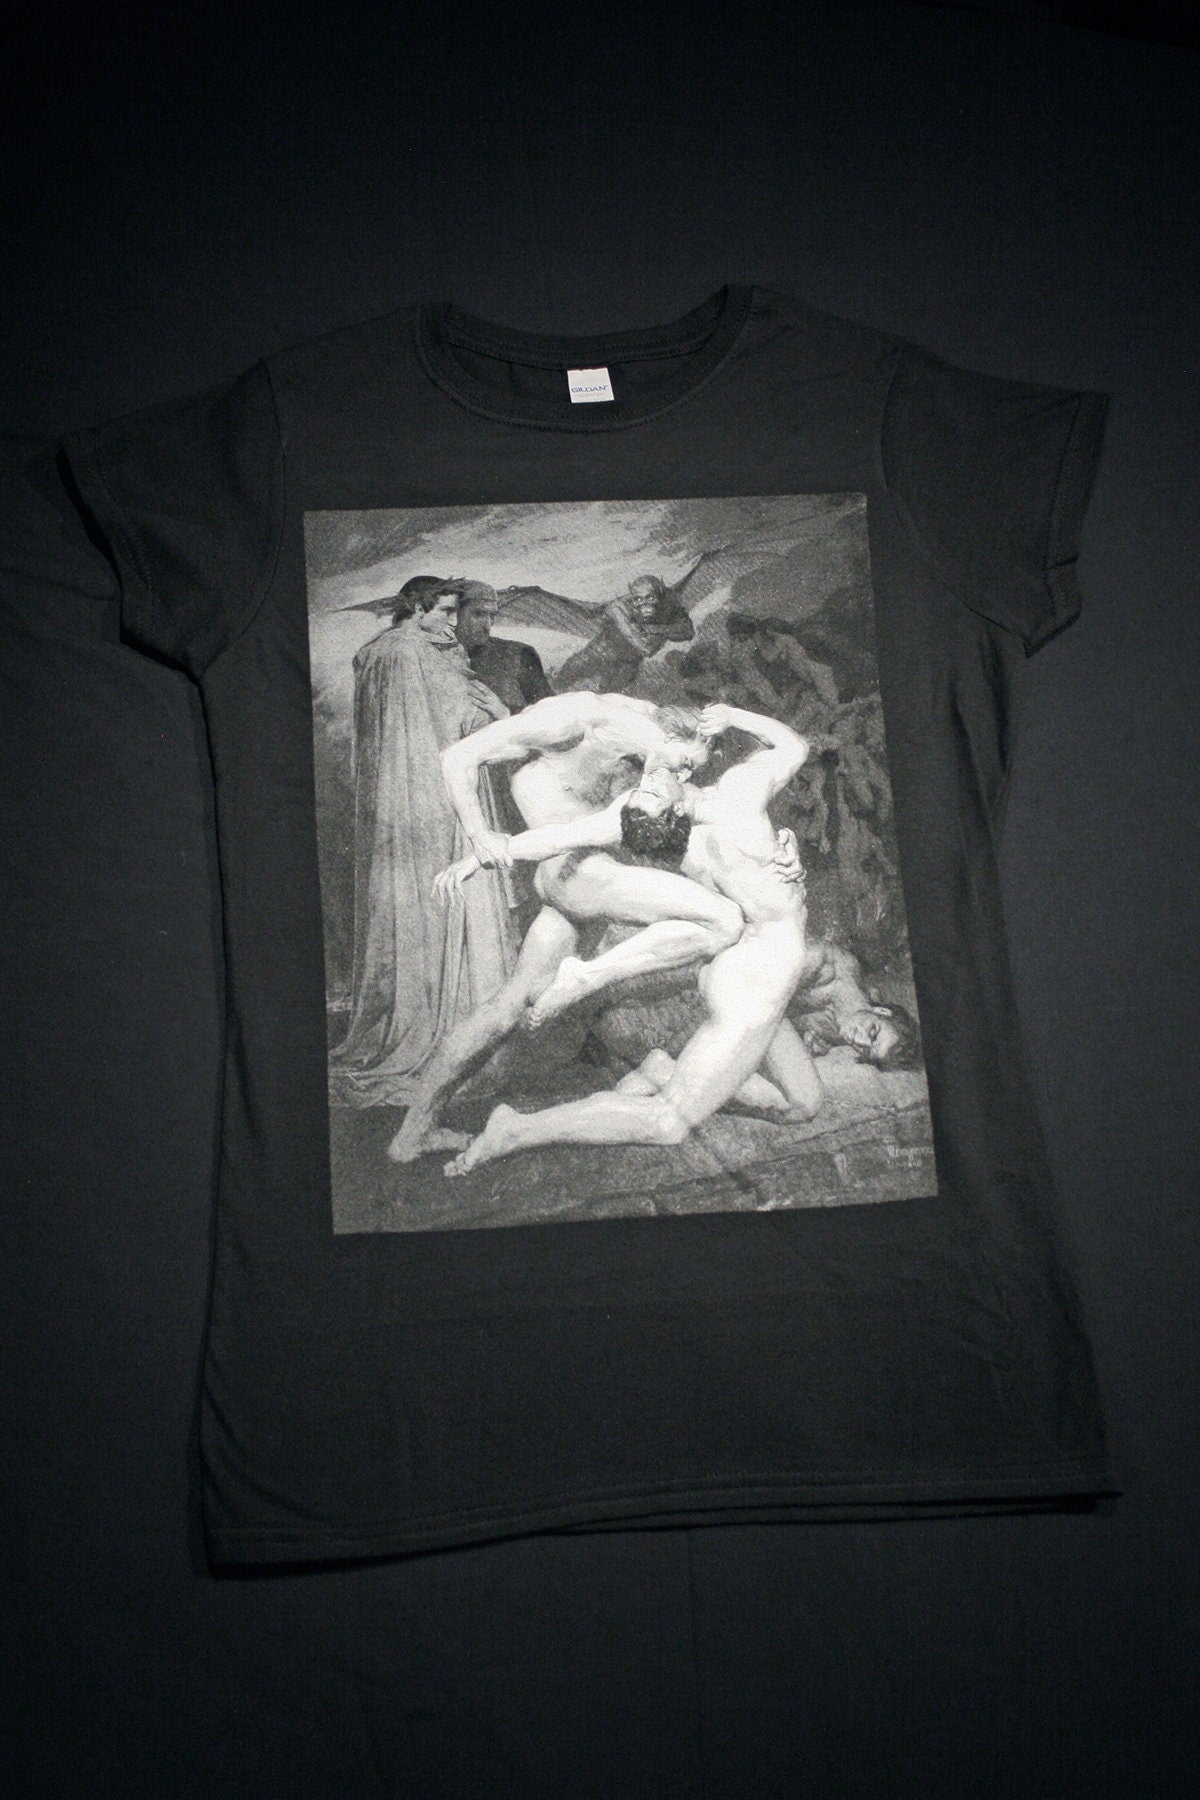 Dante & Virgil, watching two damned souls entwined in combat - T-shirt female fitted